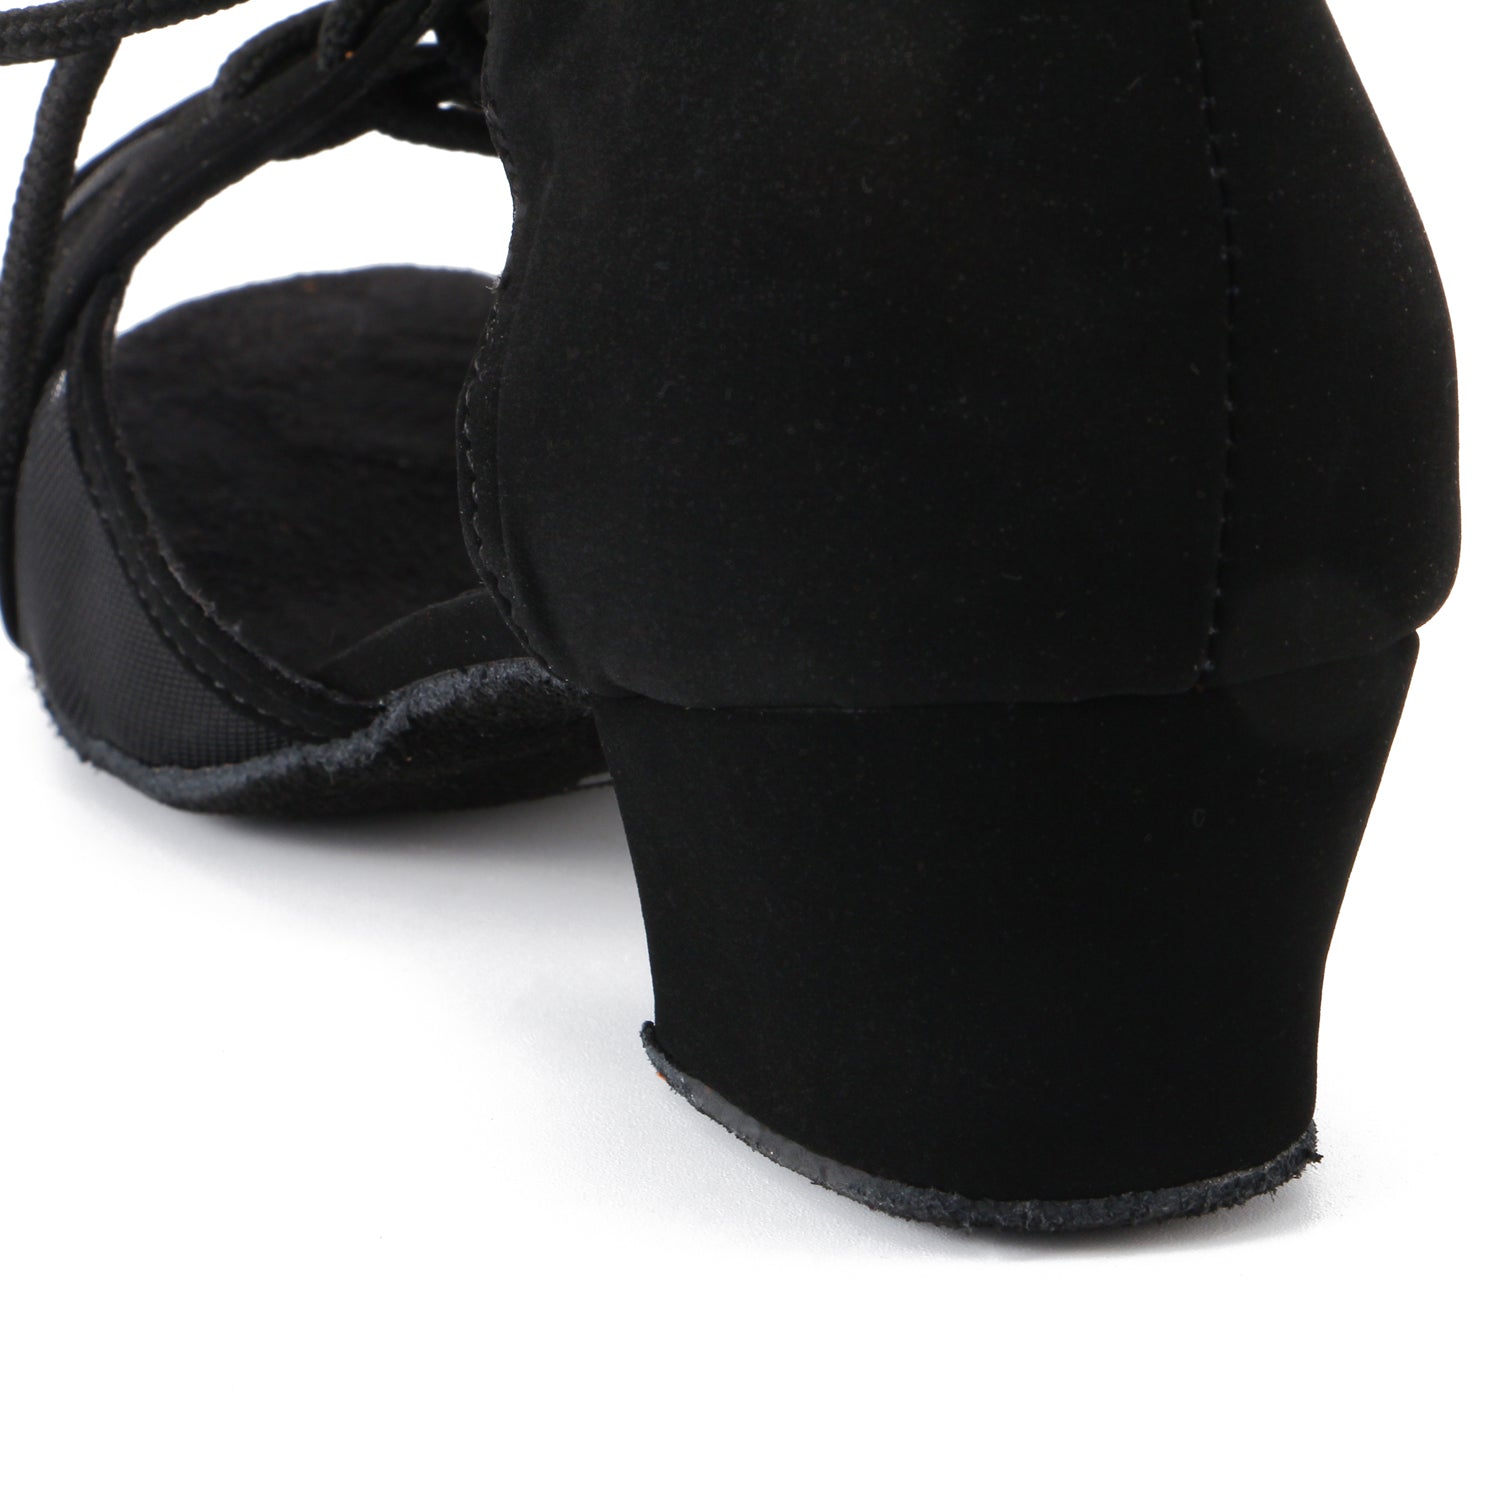 Women Ballroom Dancing Shoes with Suede Sole, Lace-up Open-toe Design in Black for Tango Latin Practice - PD-3002A4